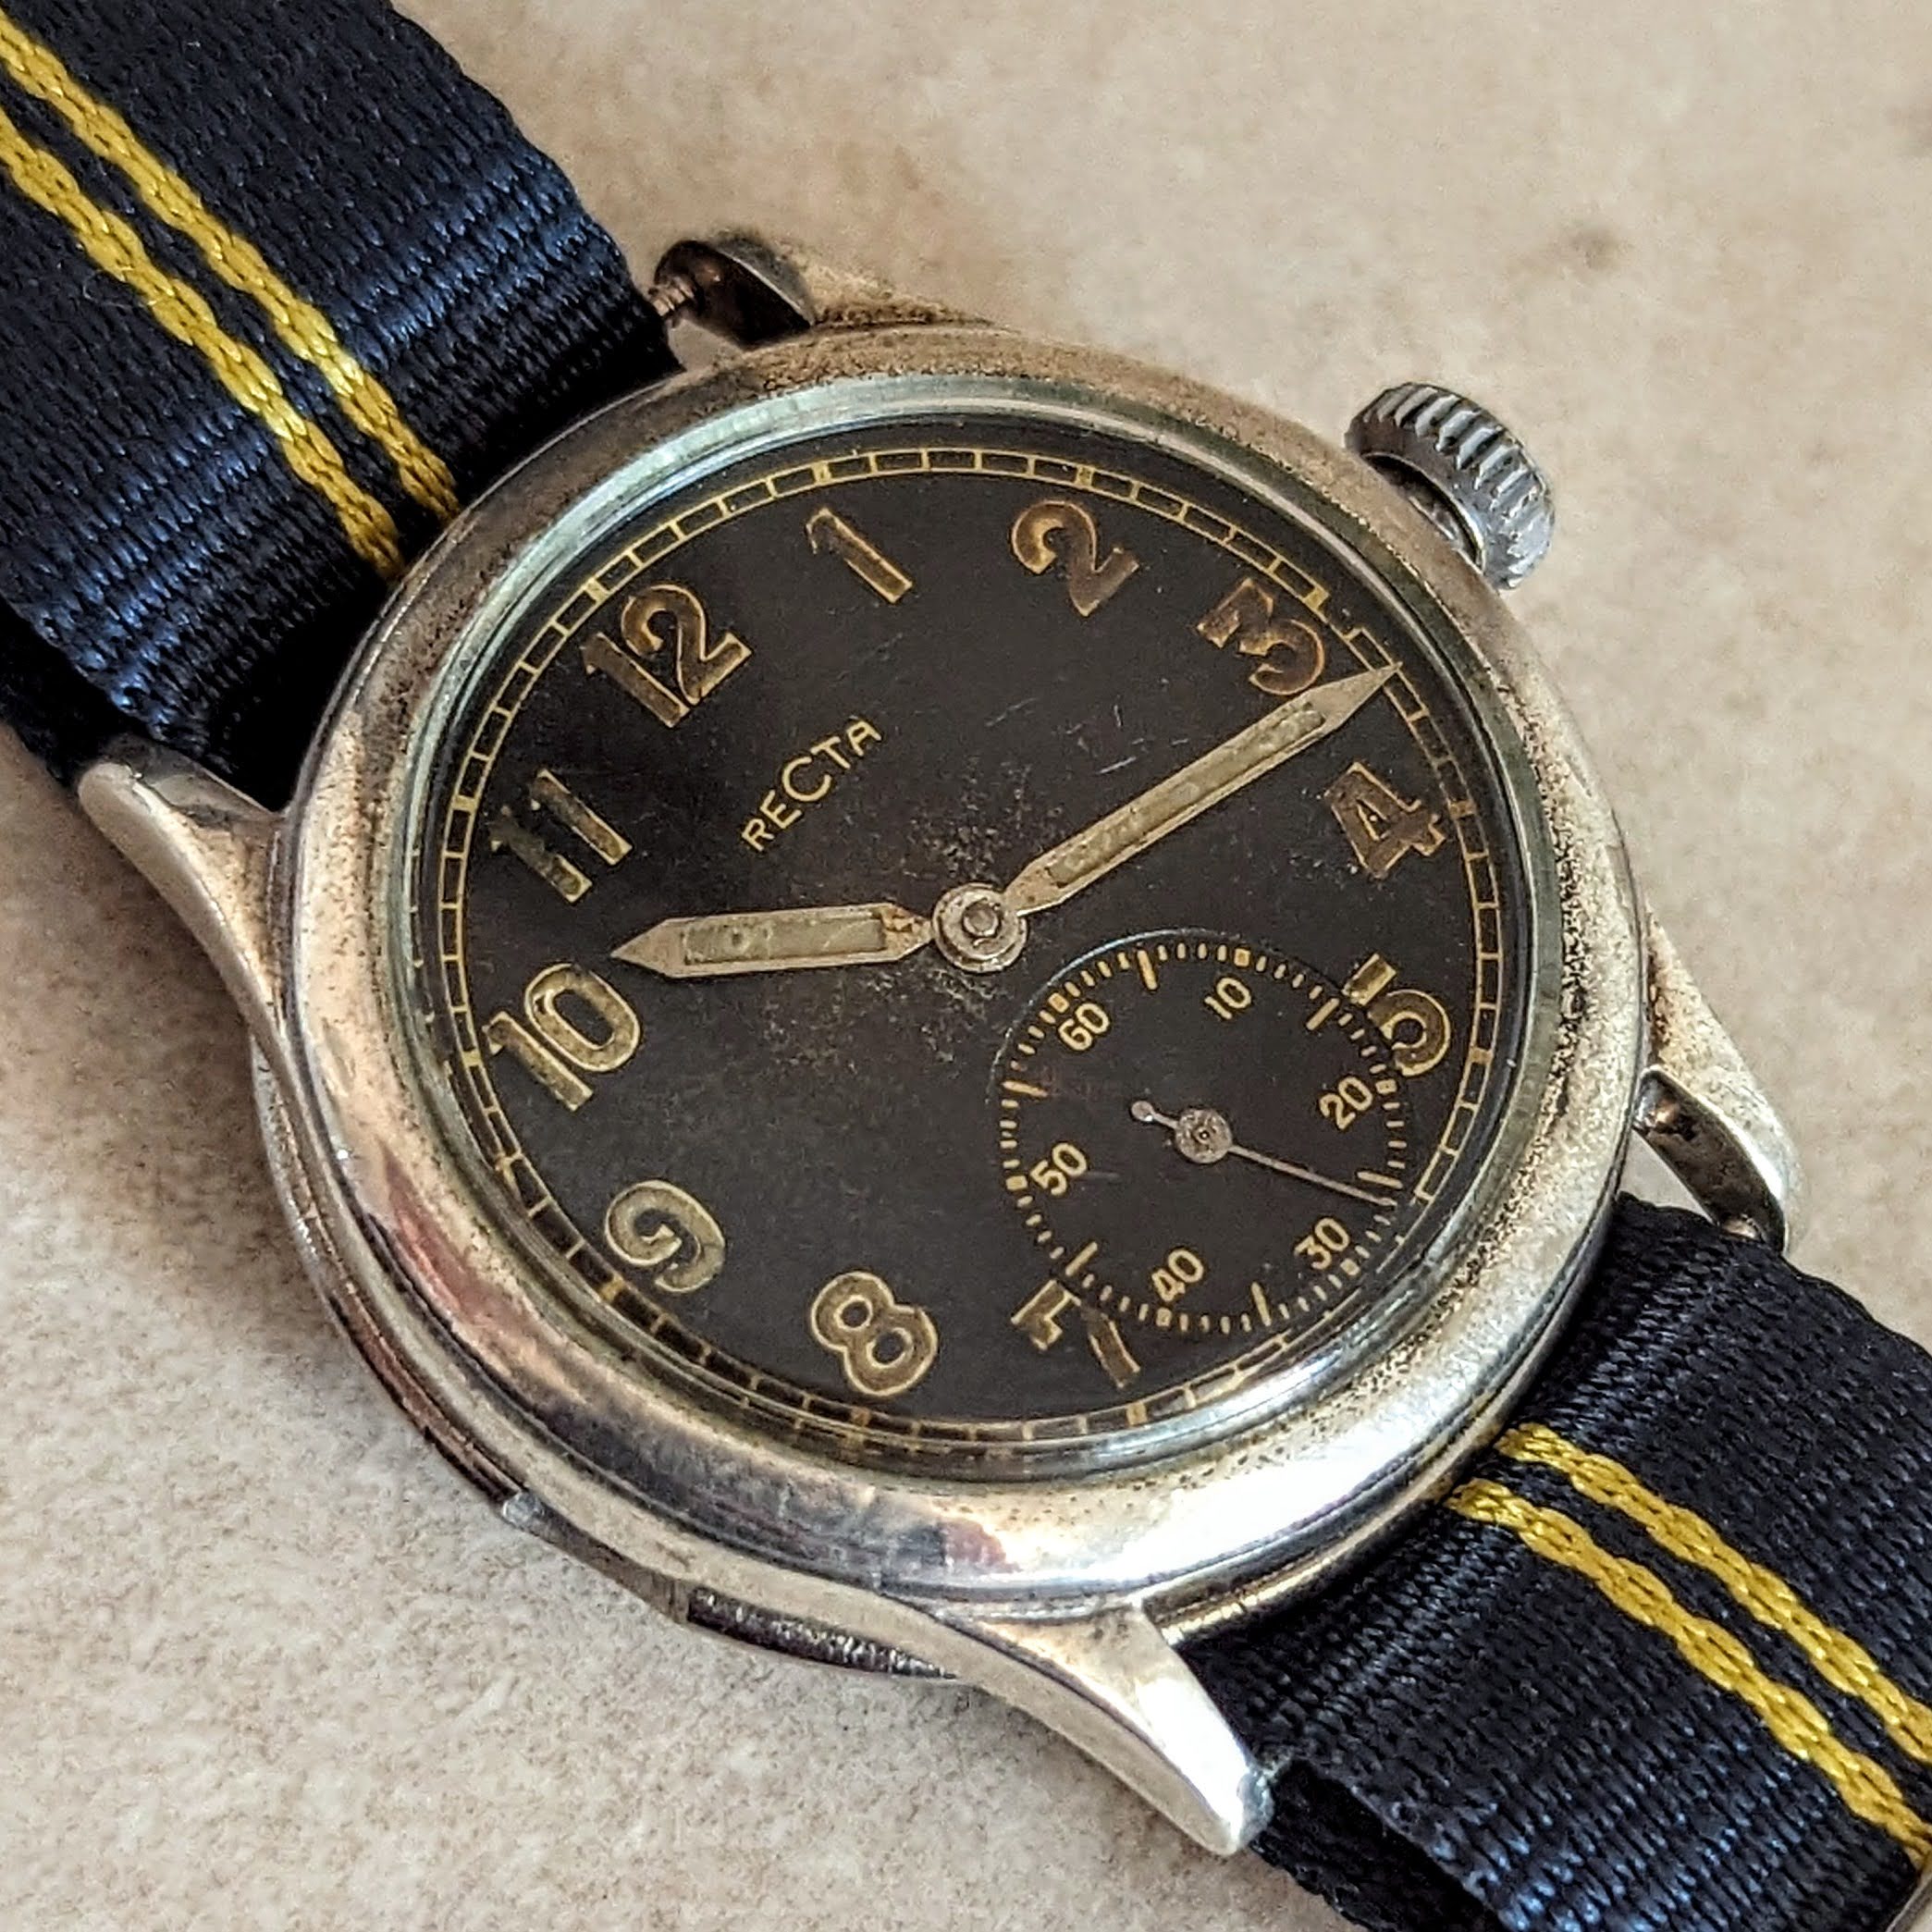 1940s RECTA Military DH Wristwatch Vintage German Army WWII Watch